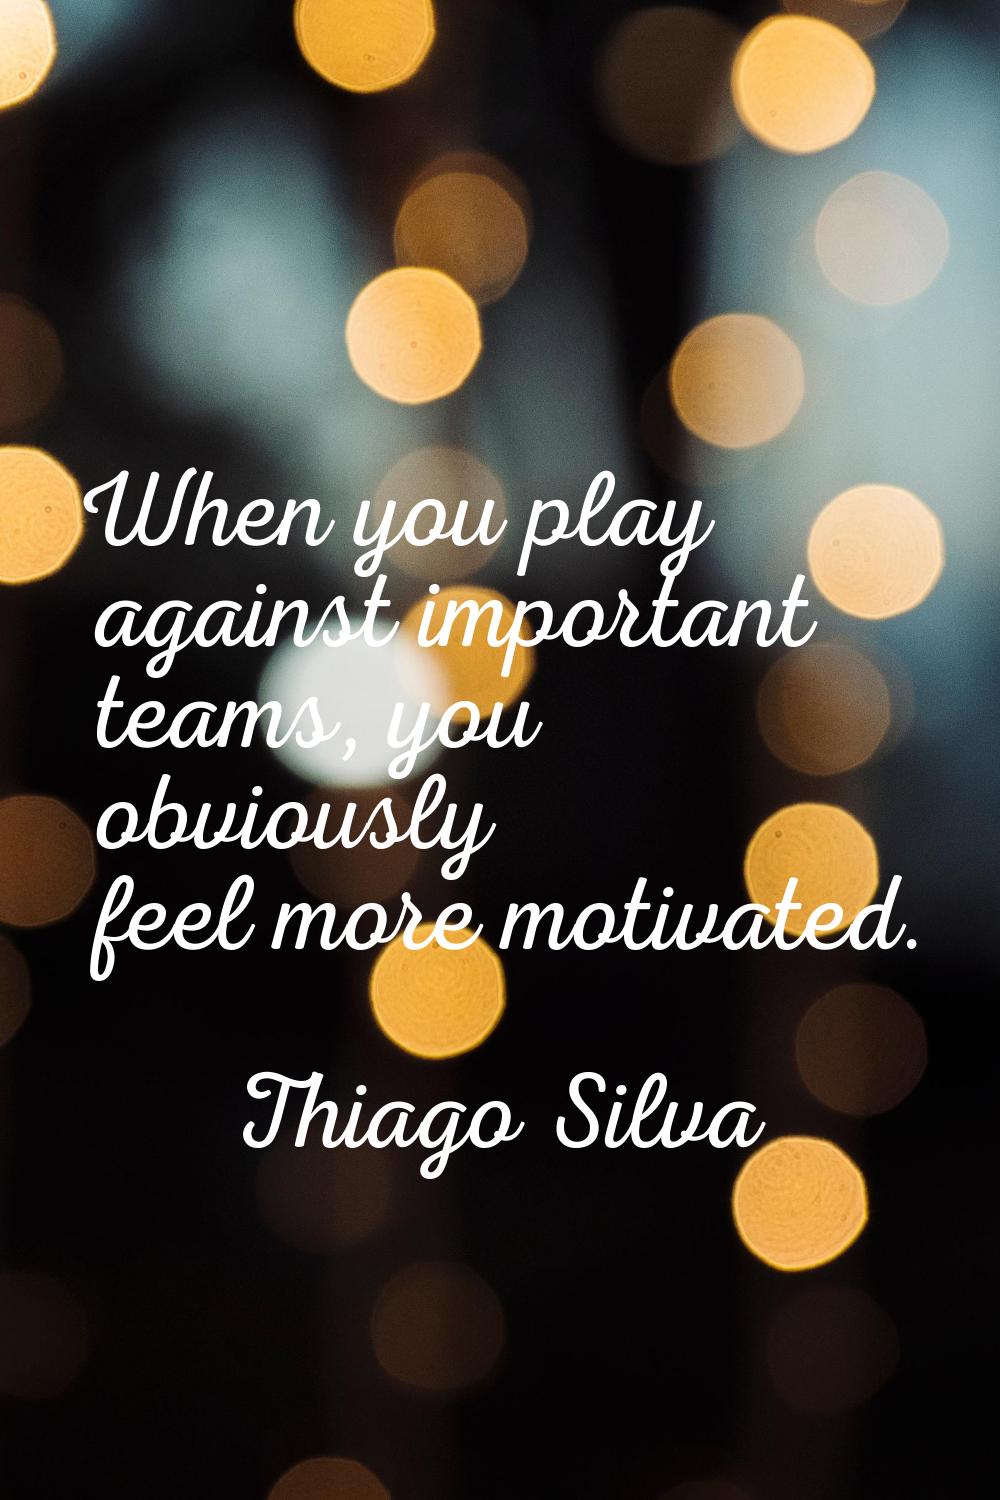 When you play against important teams, you obviously feel more motivated.